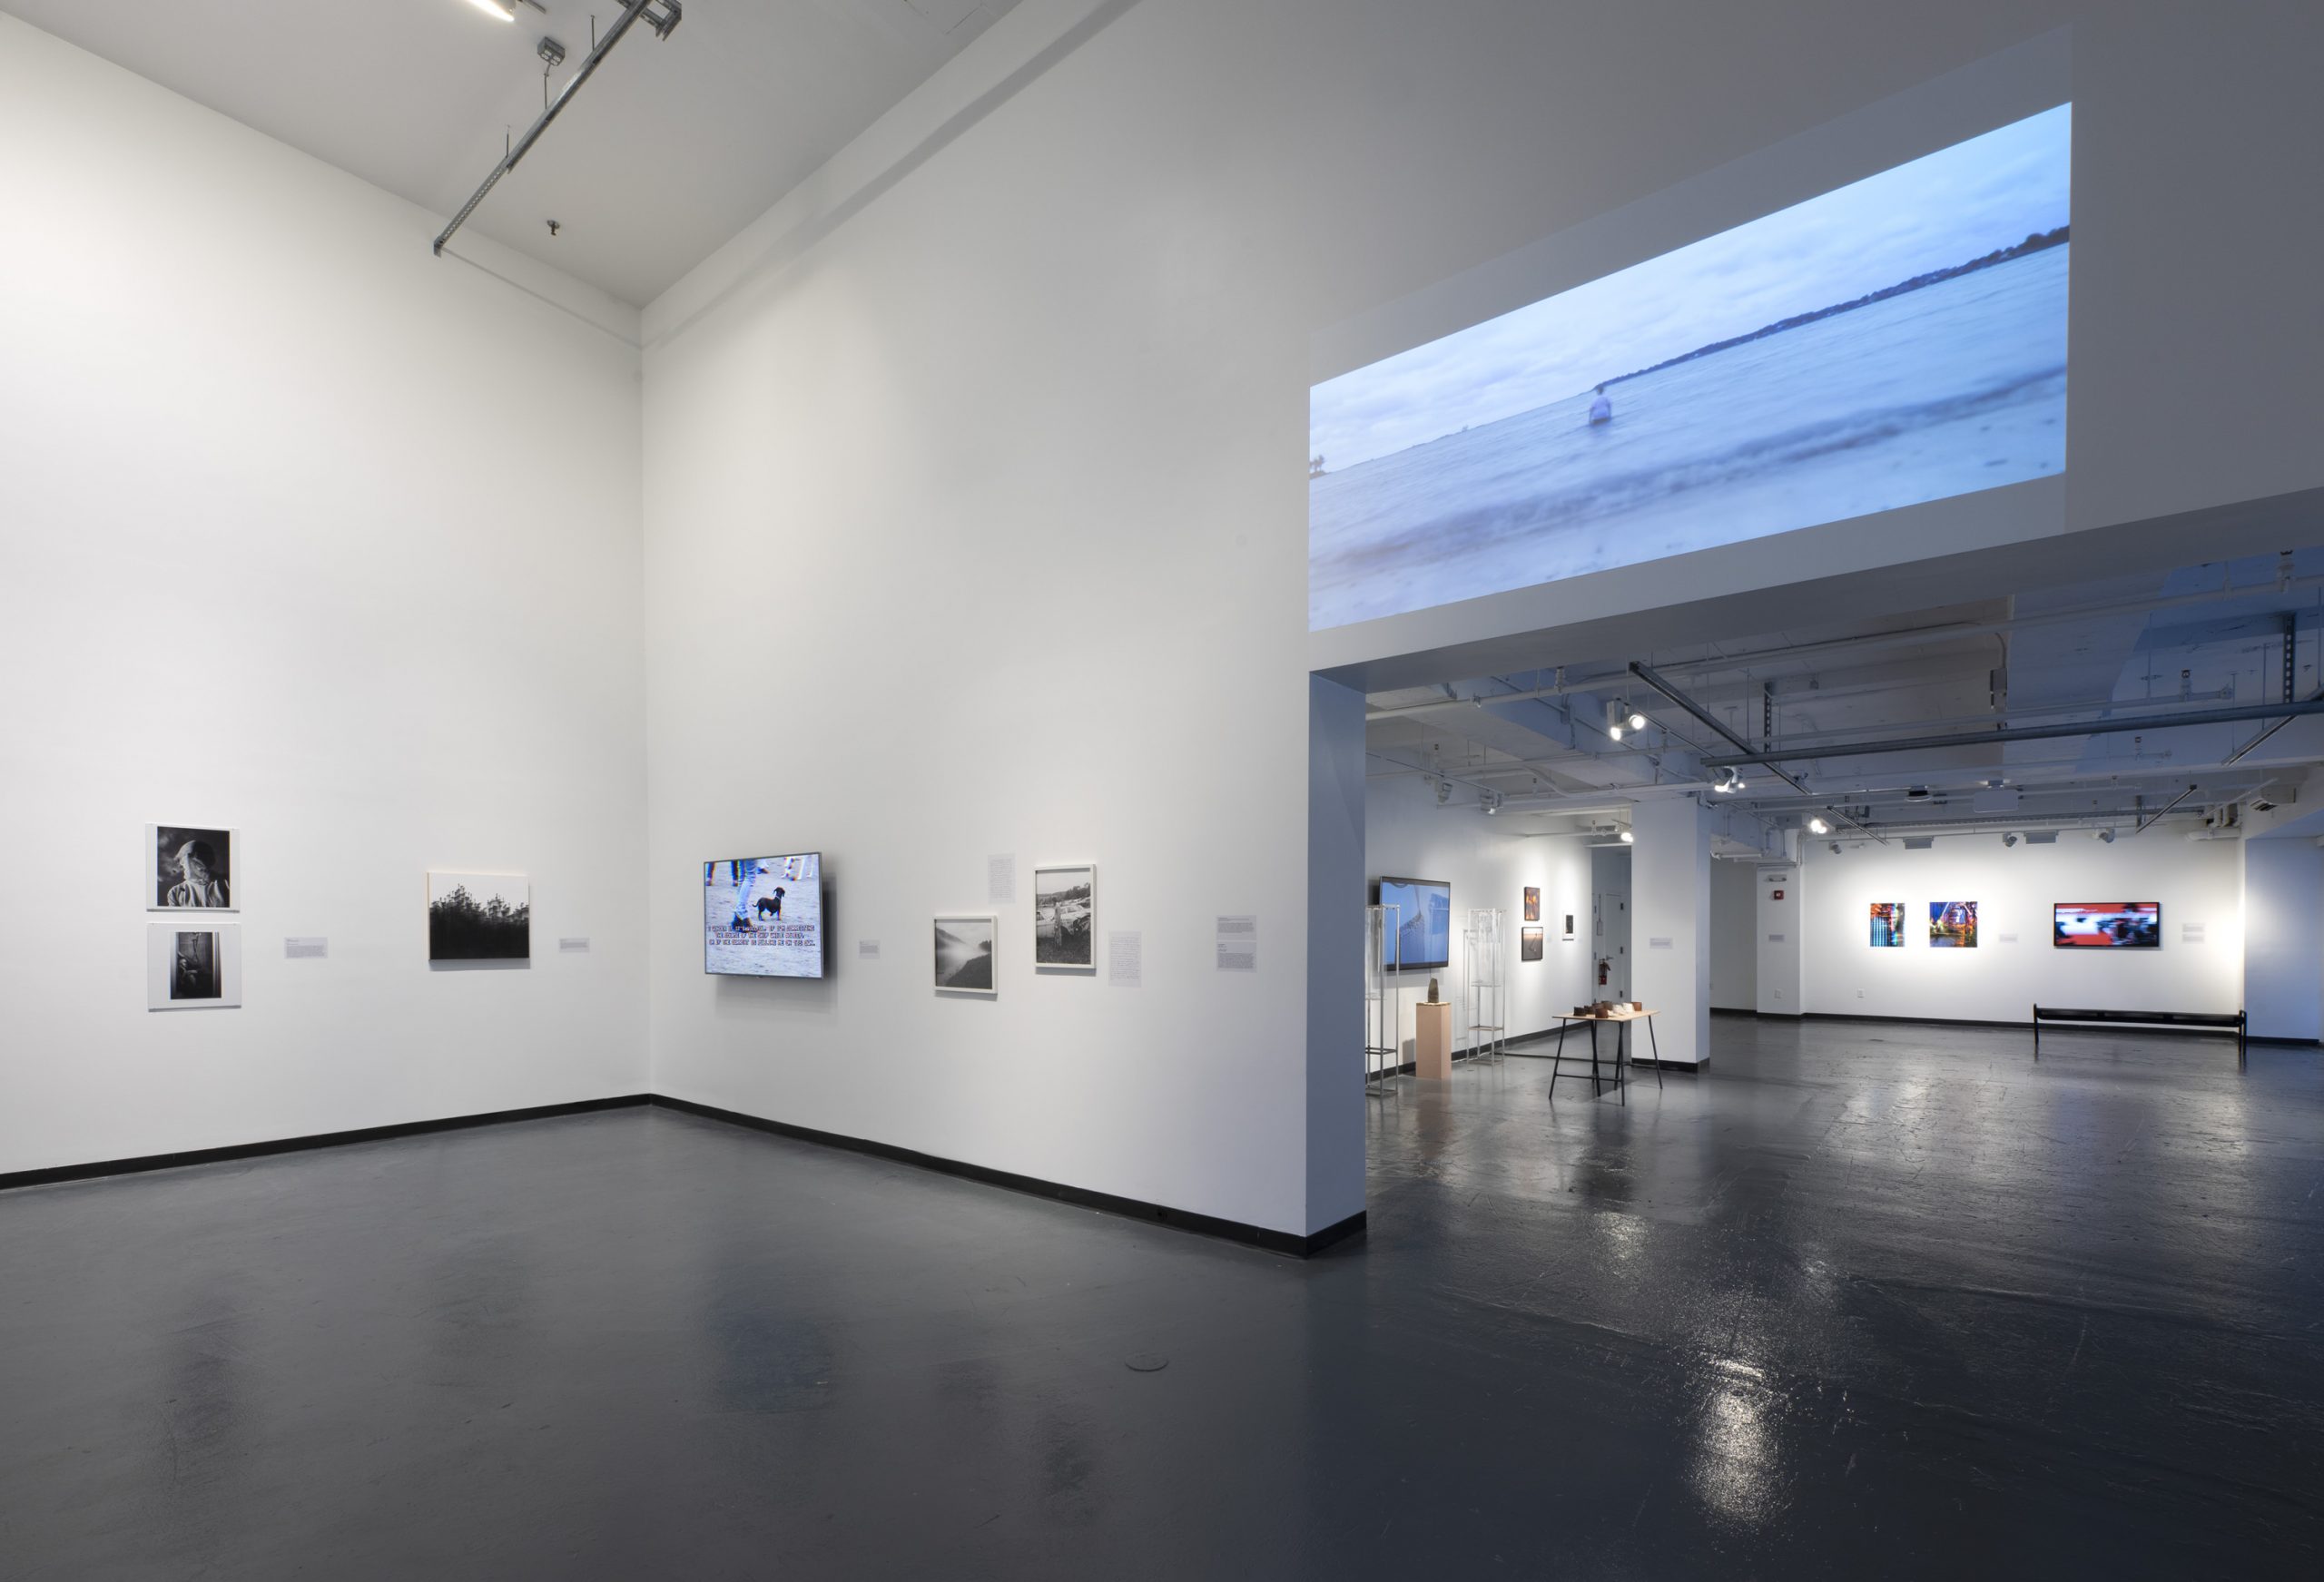 installation view of gallery showing multimedia works